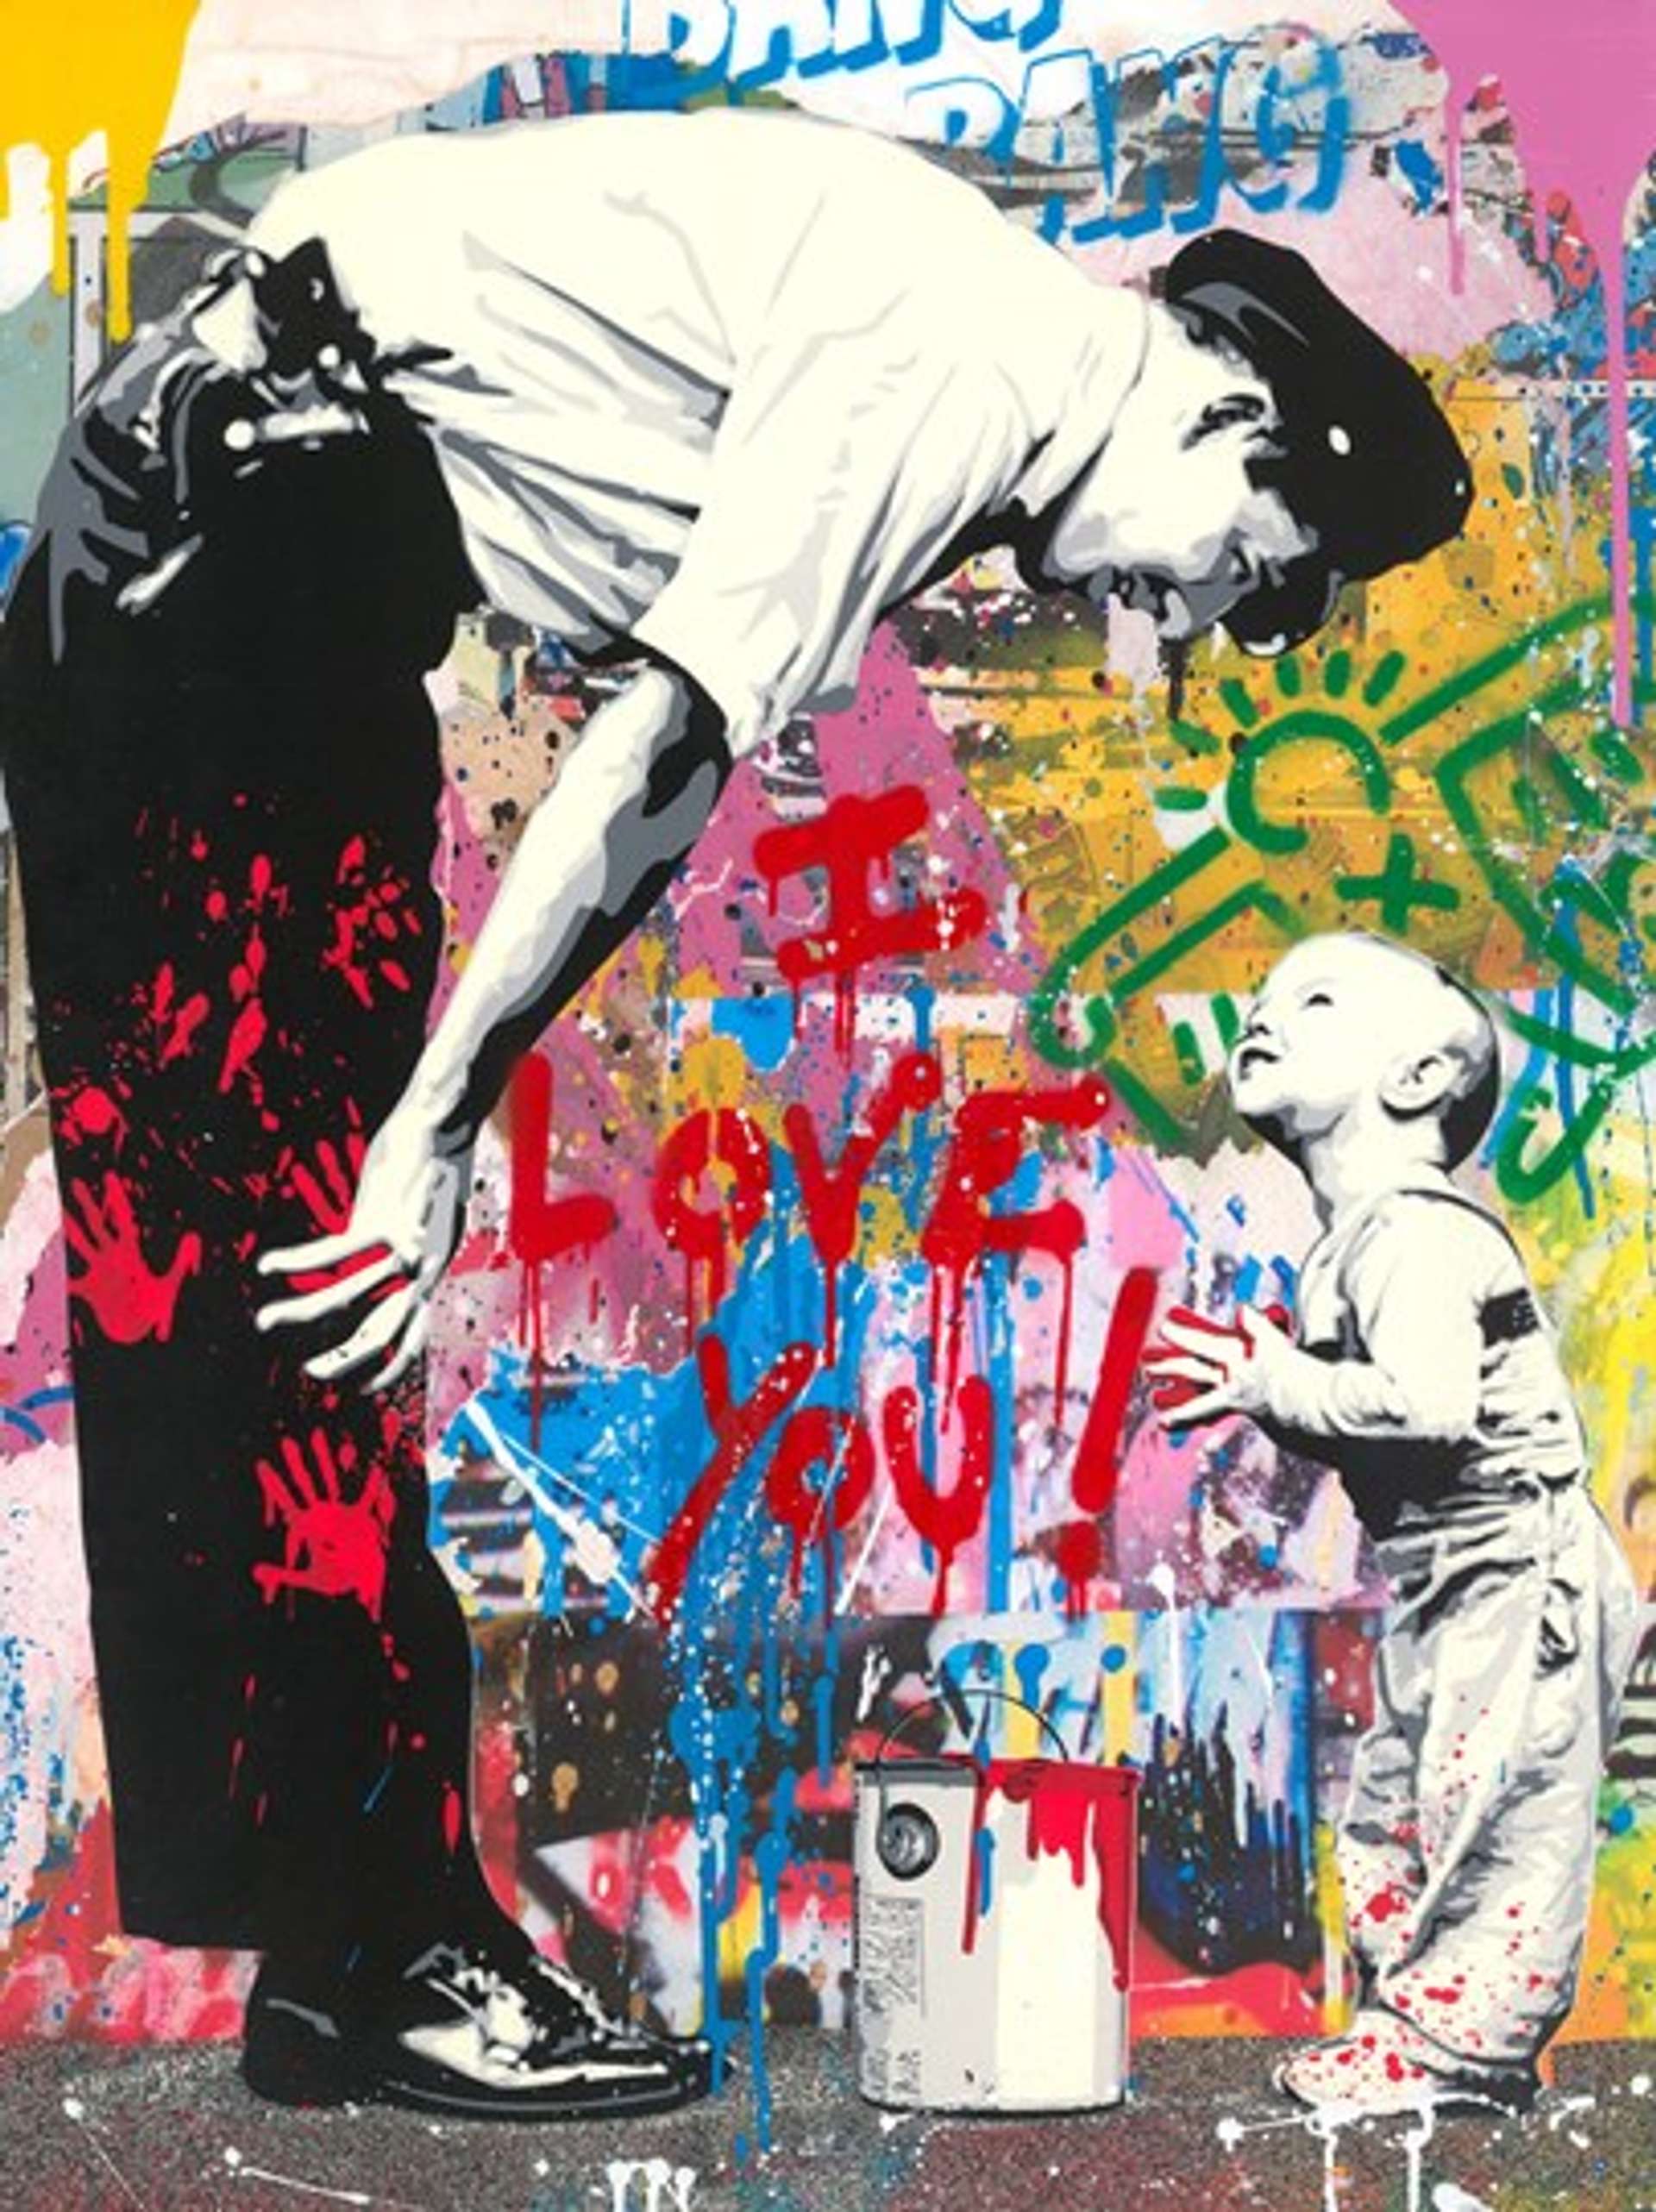 A Guide To Collecting Mr. Brainwash Art